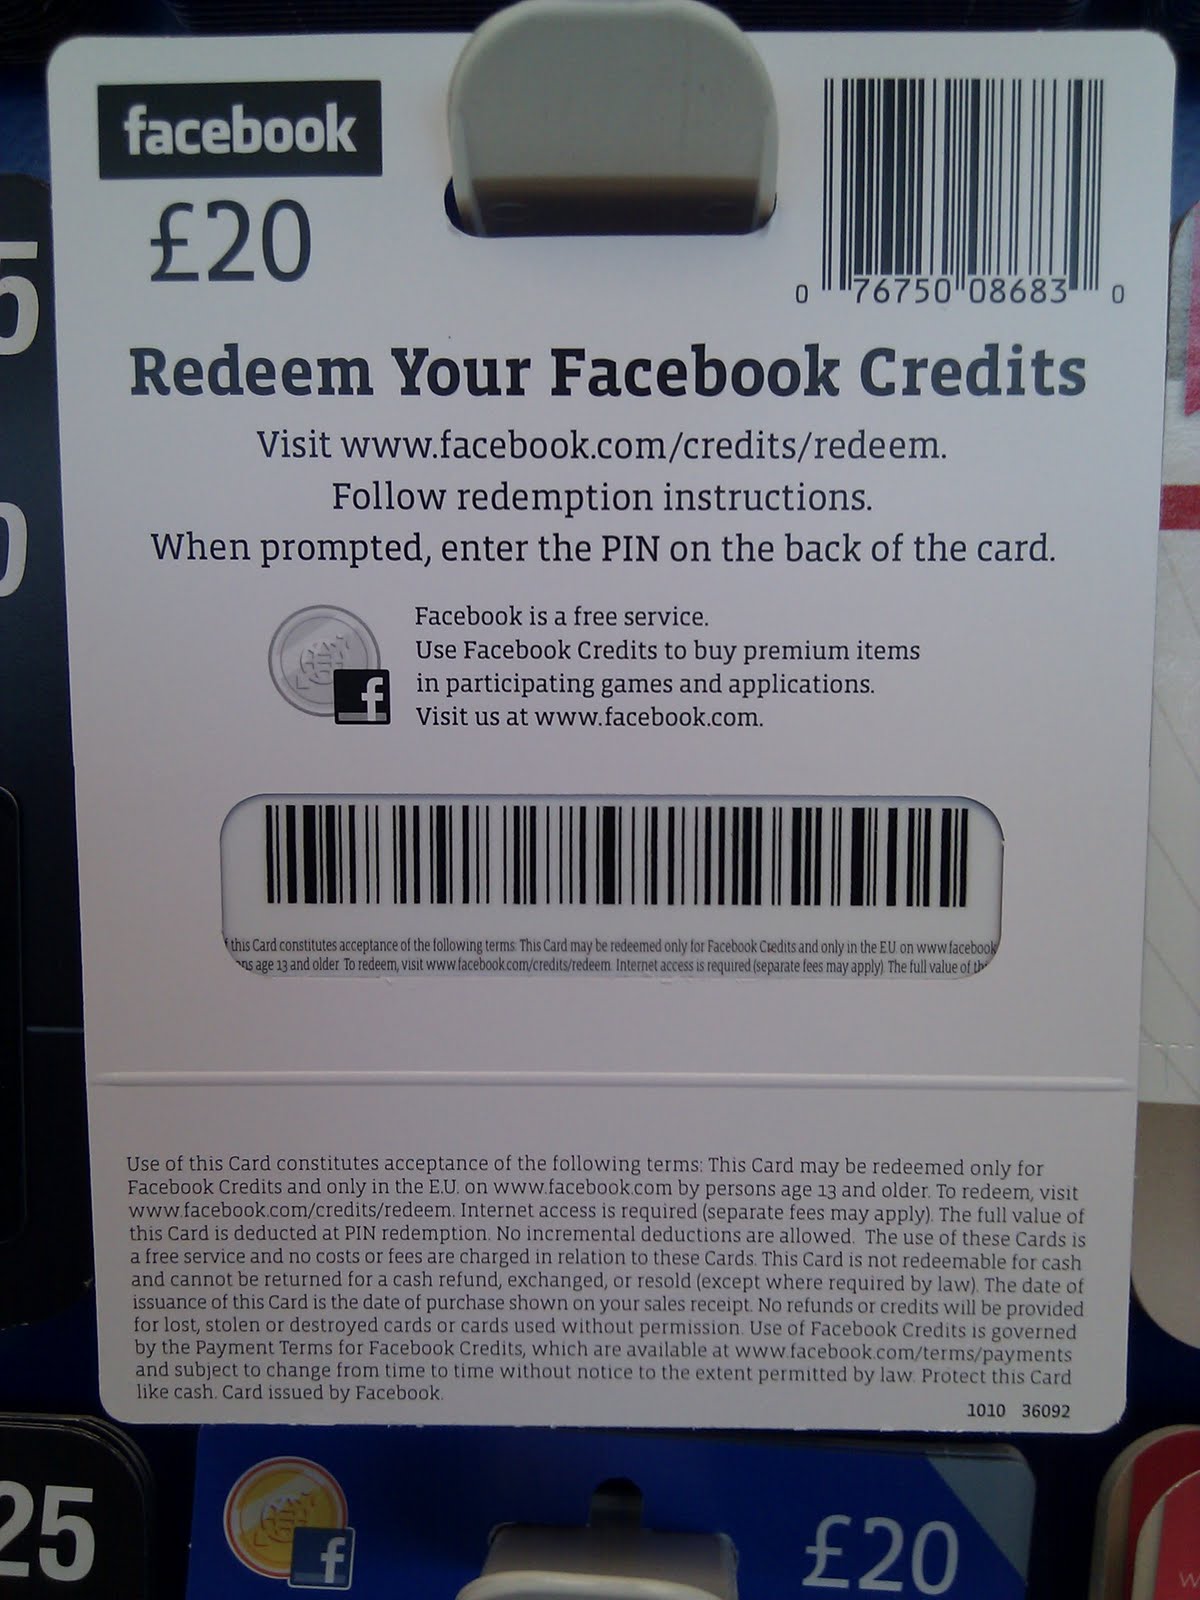 Facebook Credits Gift Cards - now available at Tesco